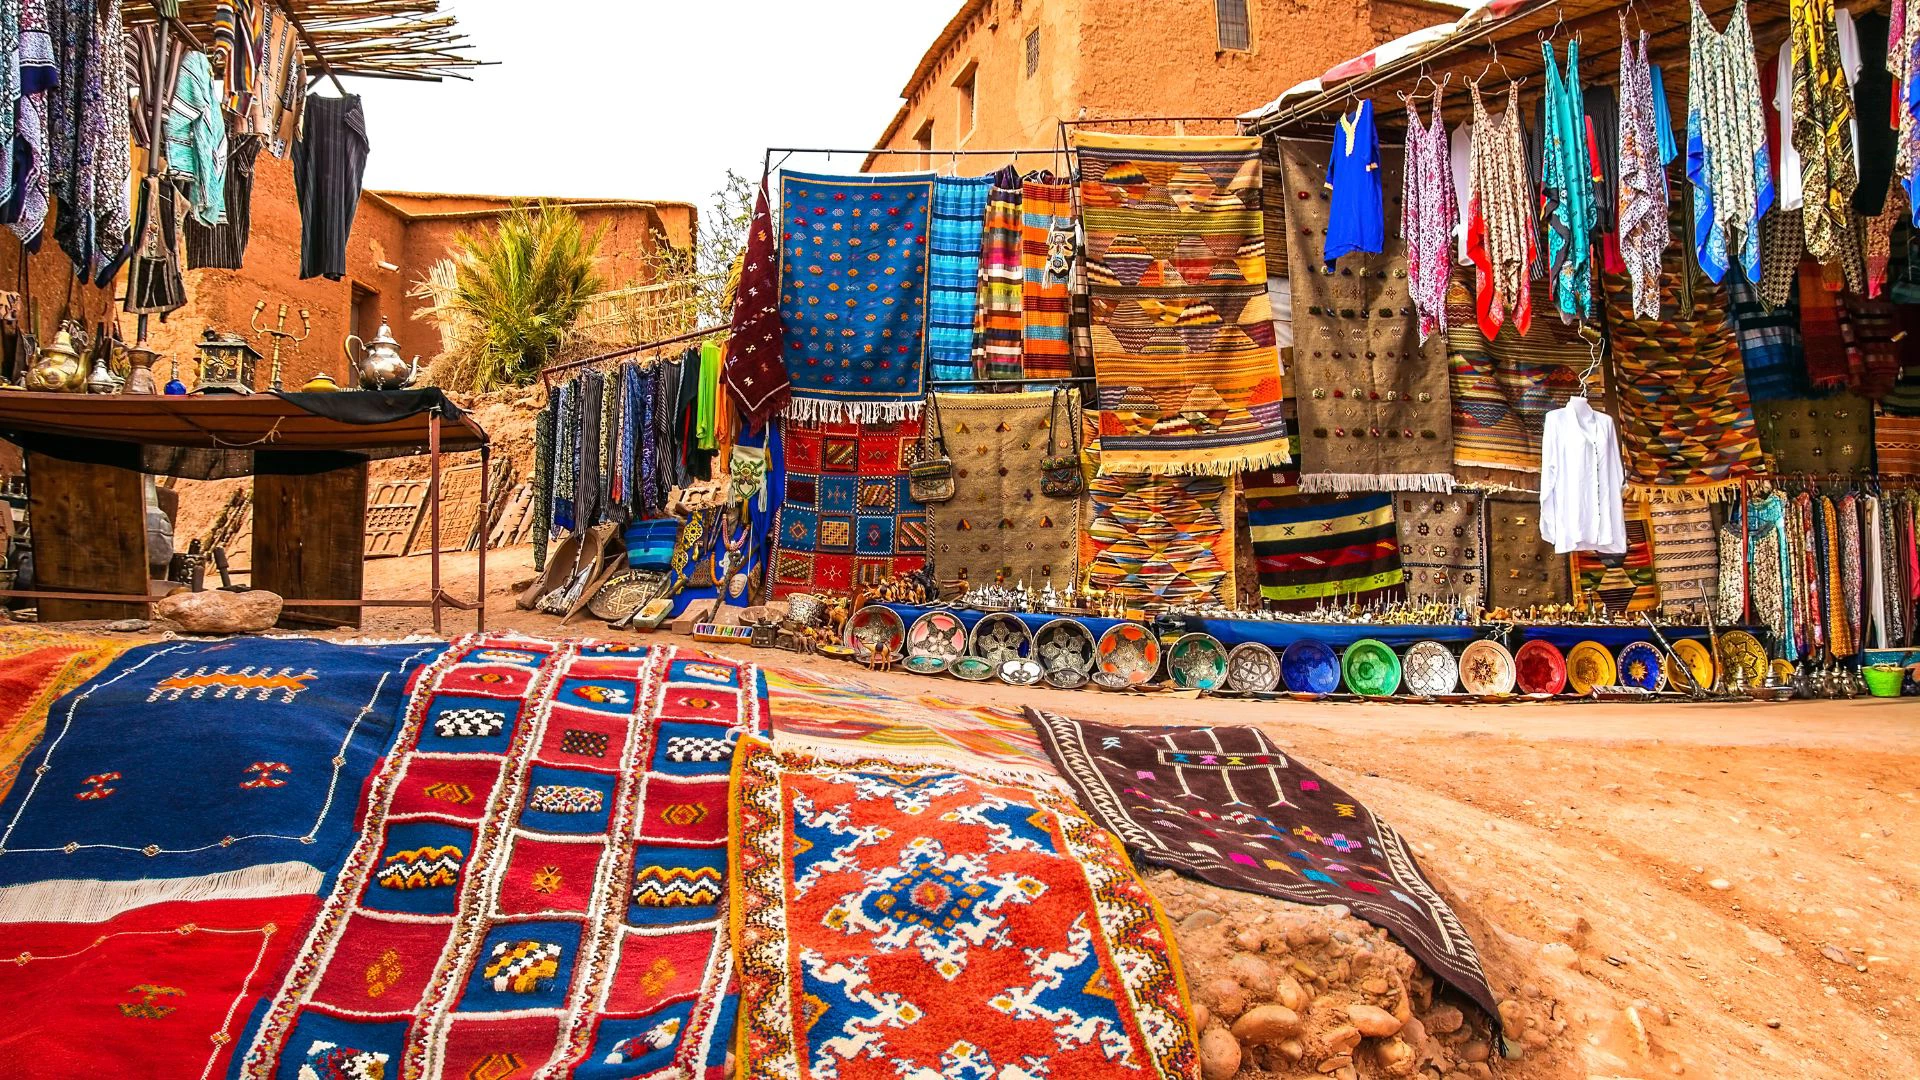 Trust in institutions: Five Takeaways from Morocco surveys 